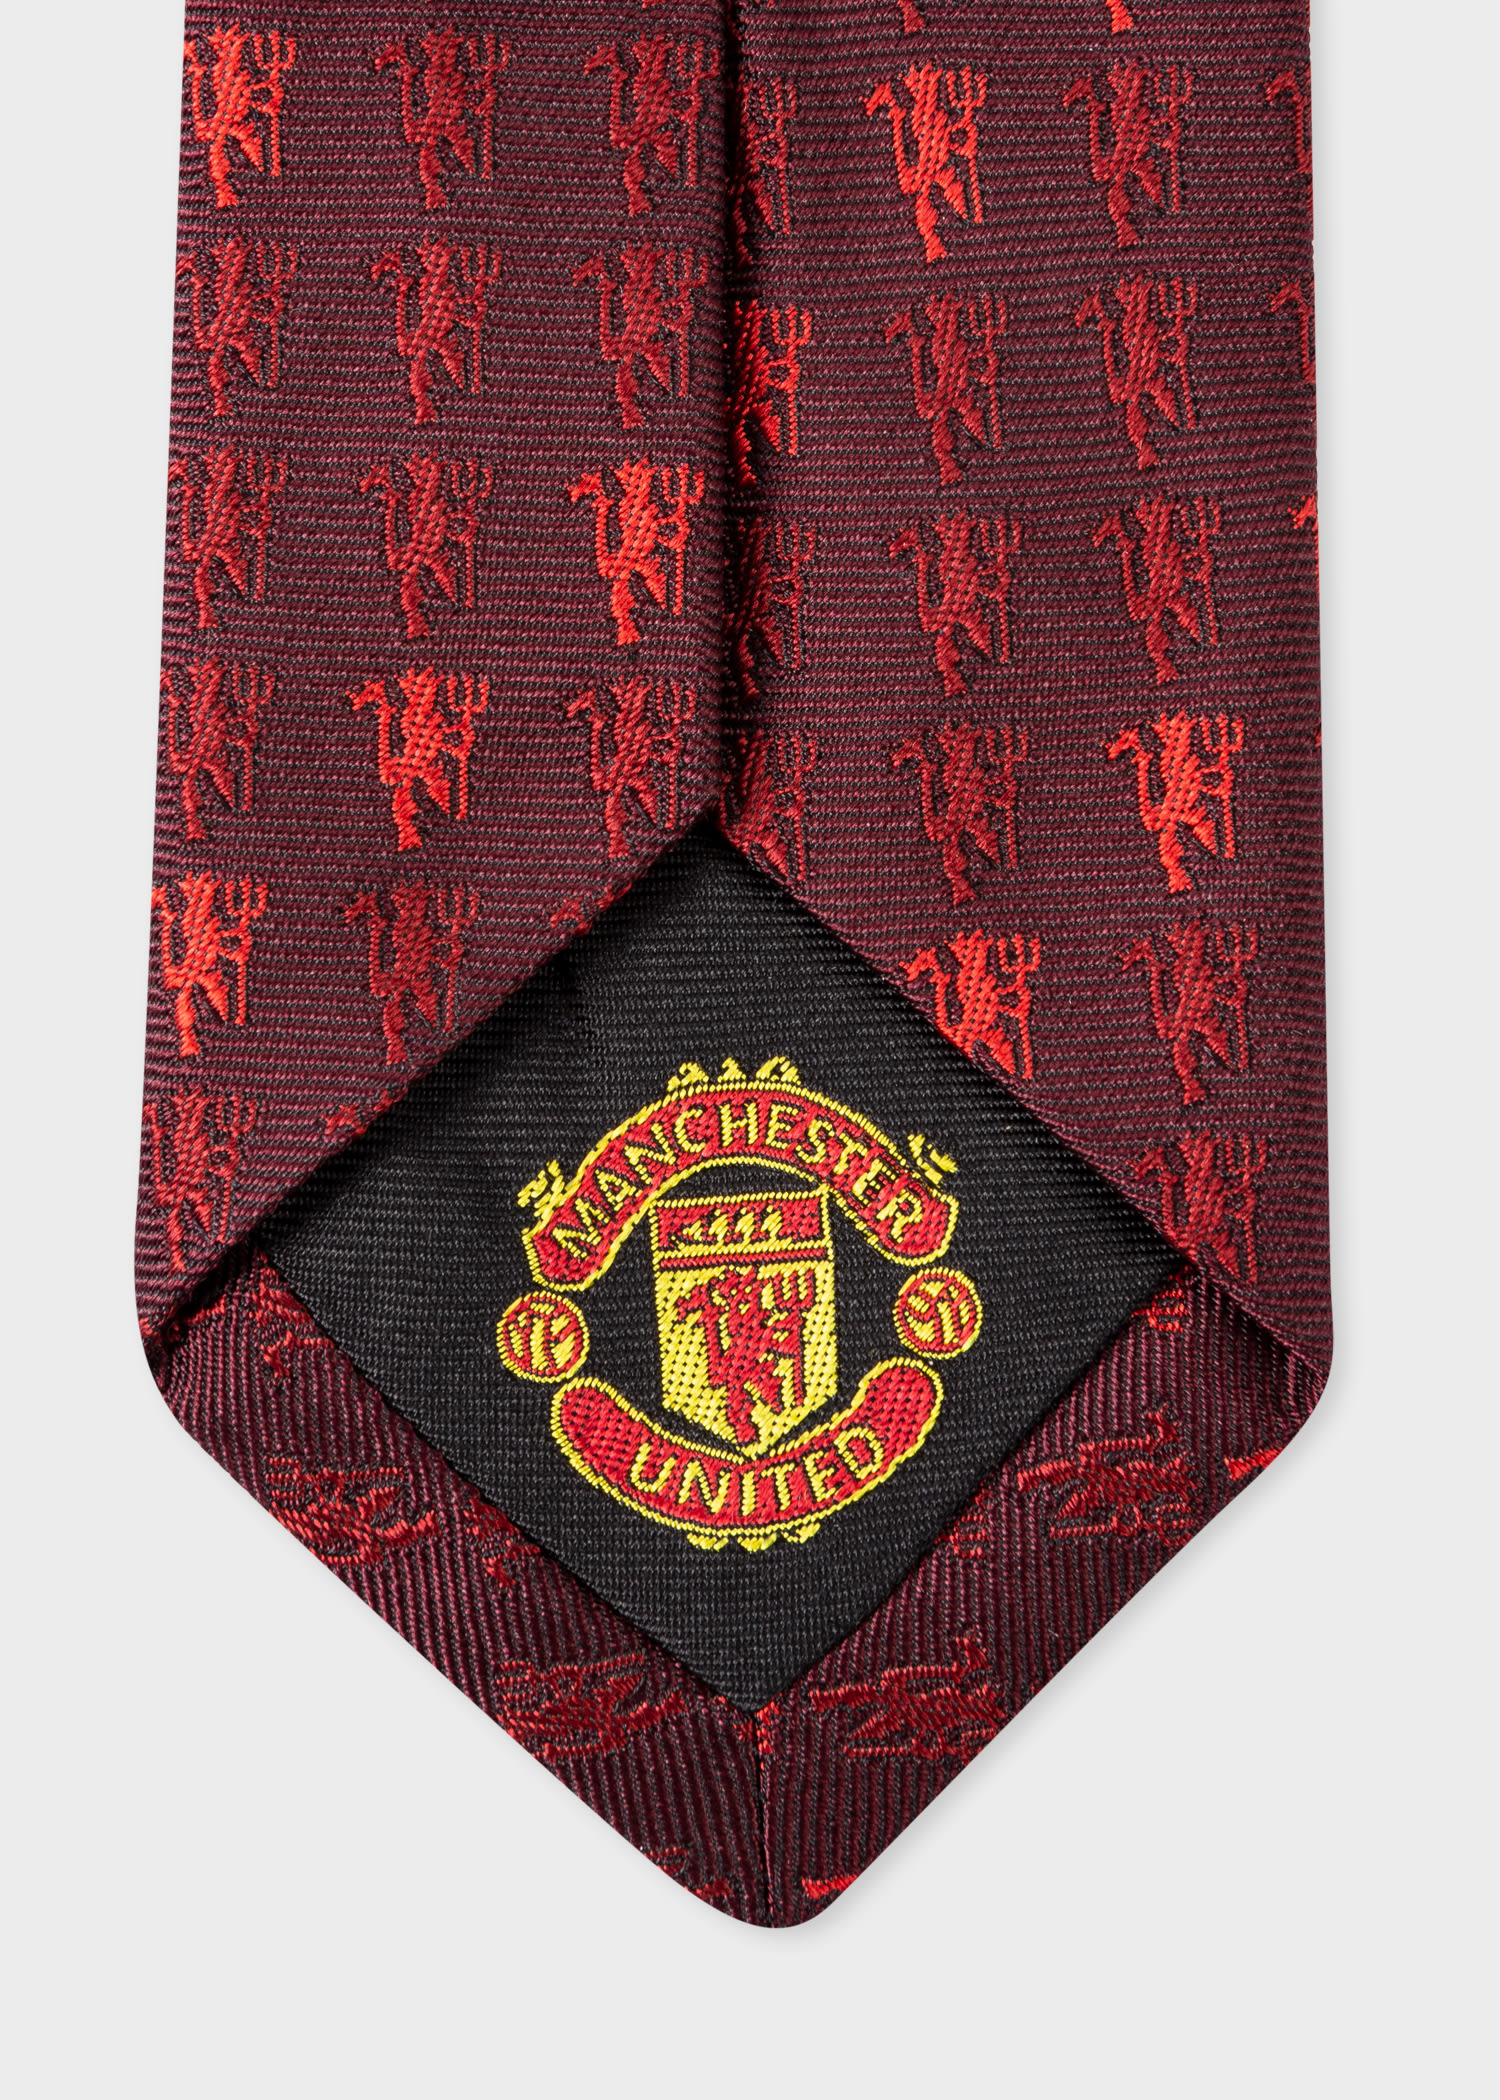 Paul Smith & Manchester United - 'Red Devil' Narrow Silk Tie - Paul